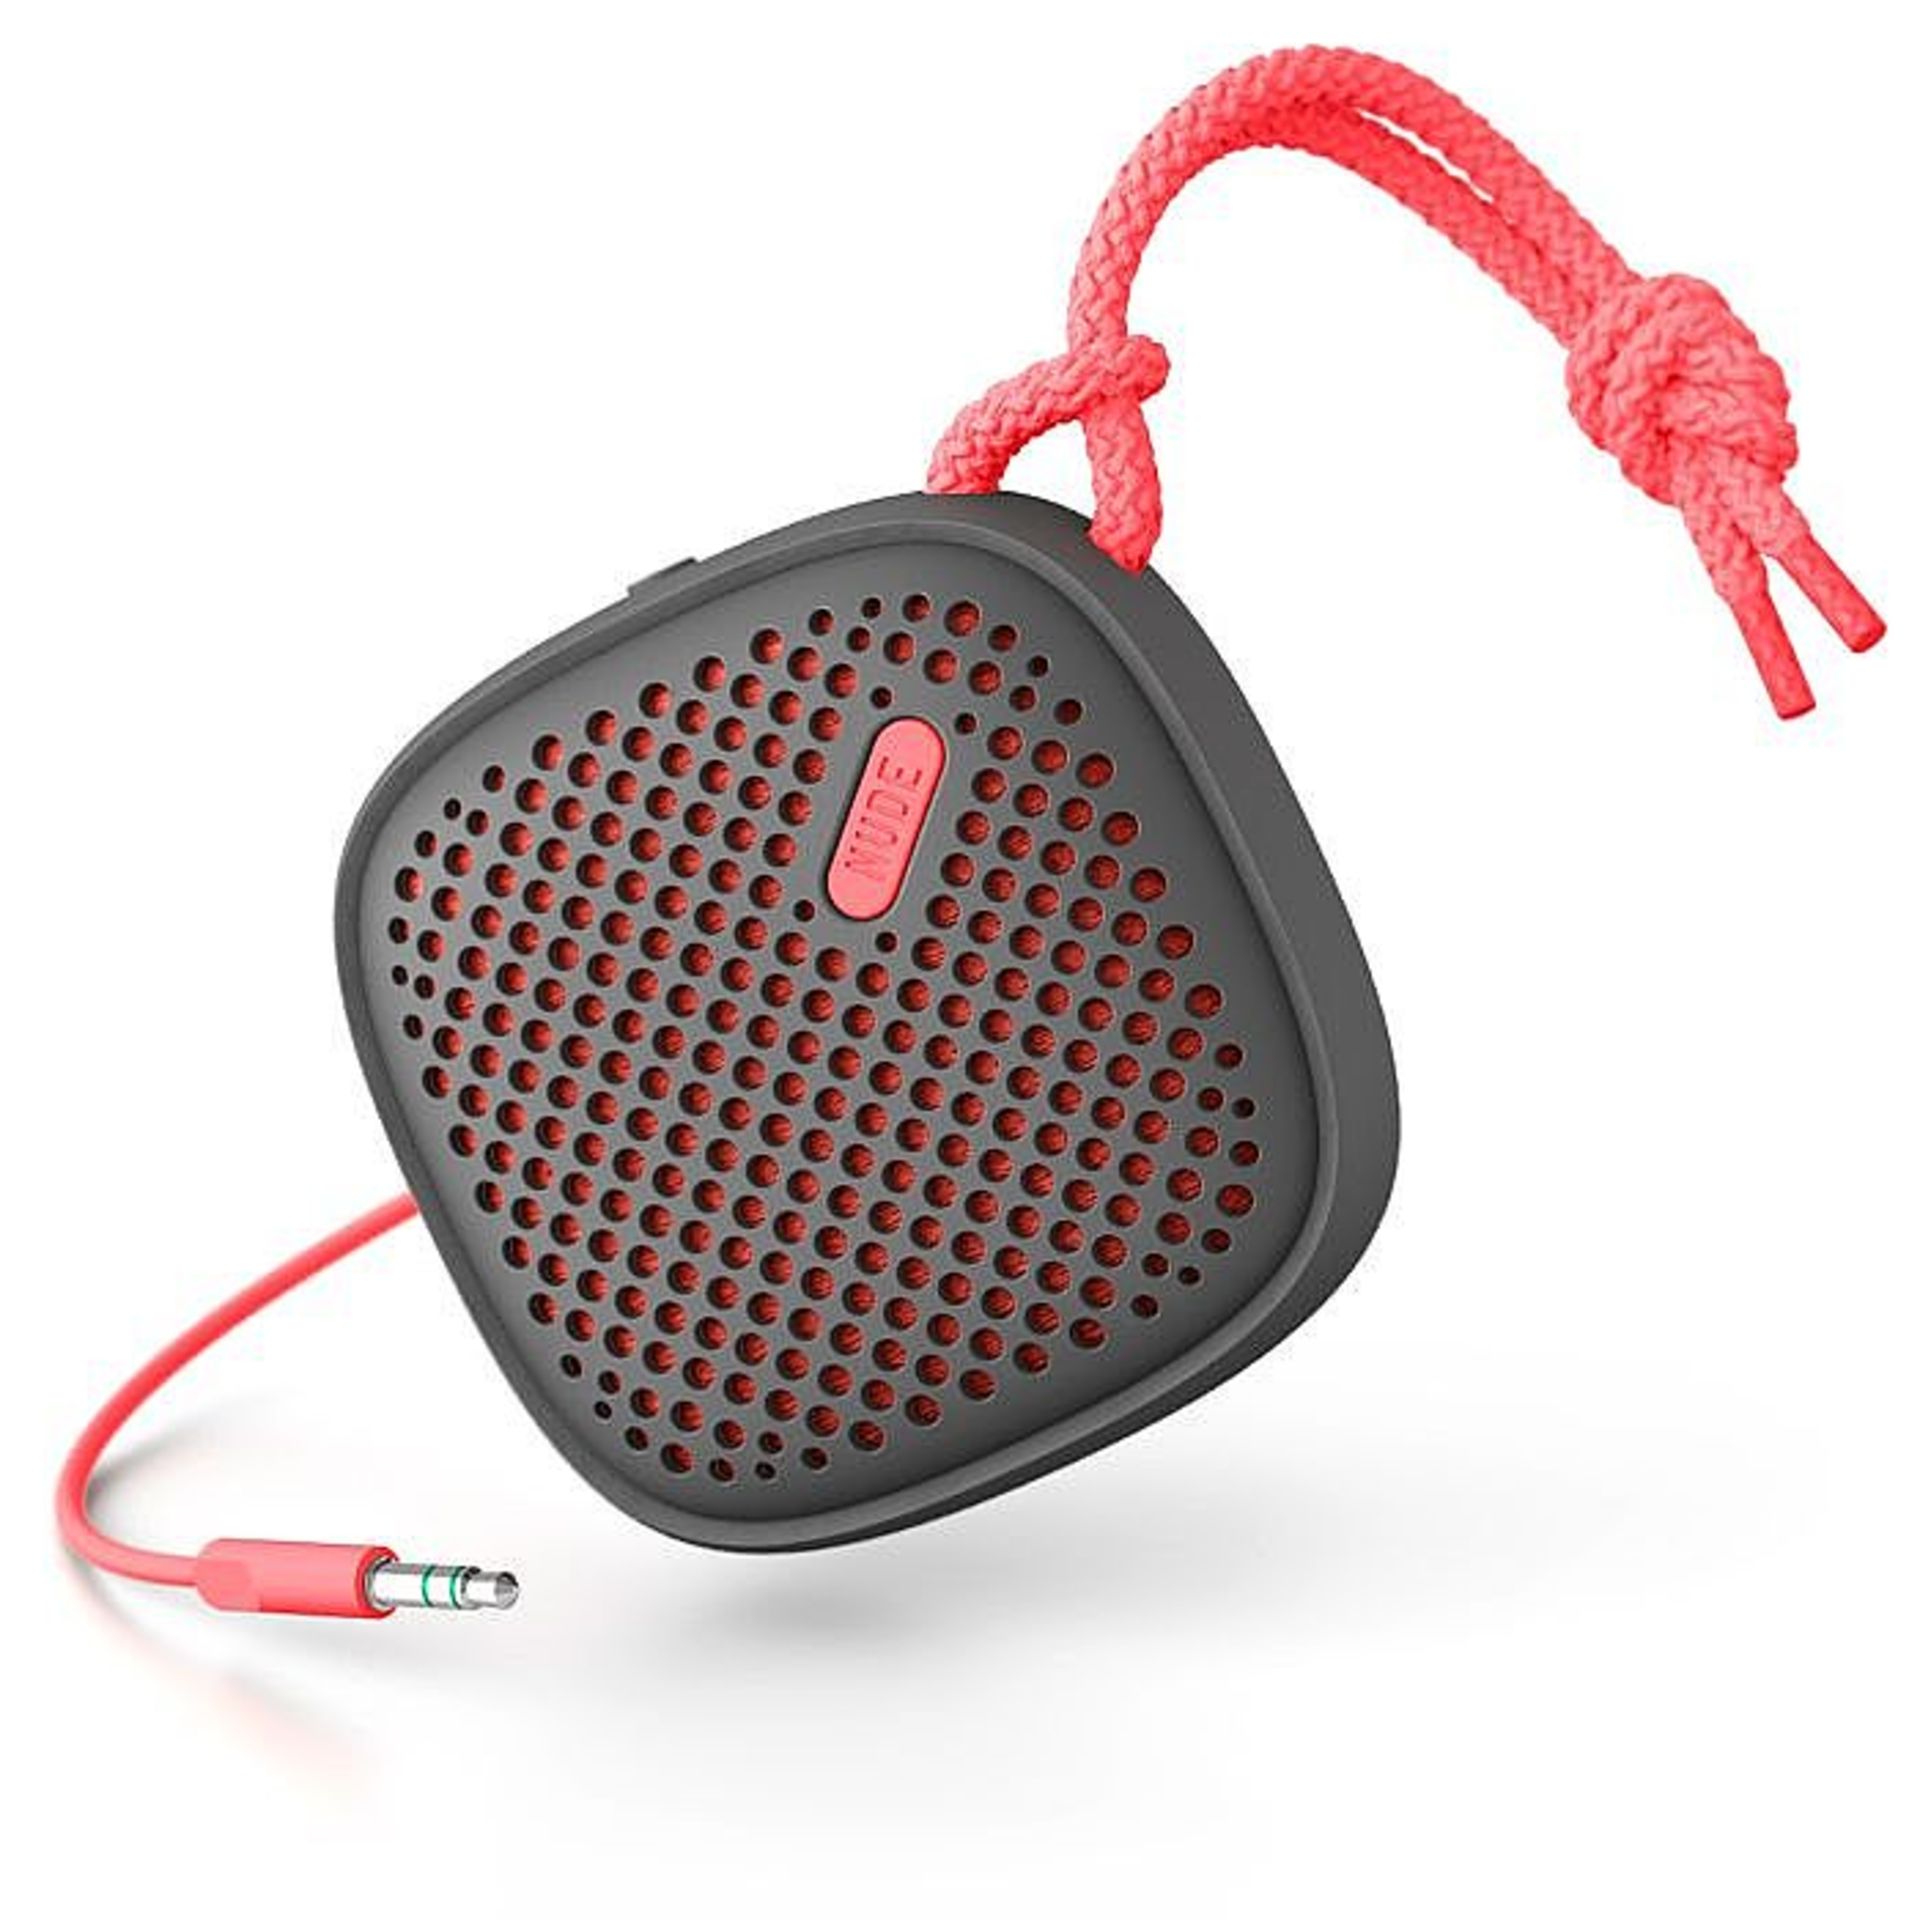 V *TRADE QTY* Brand New Nude Audio Move S Wired Portable Speaker - Coral X 6 YOUR BID PRICE TO BE